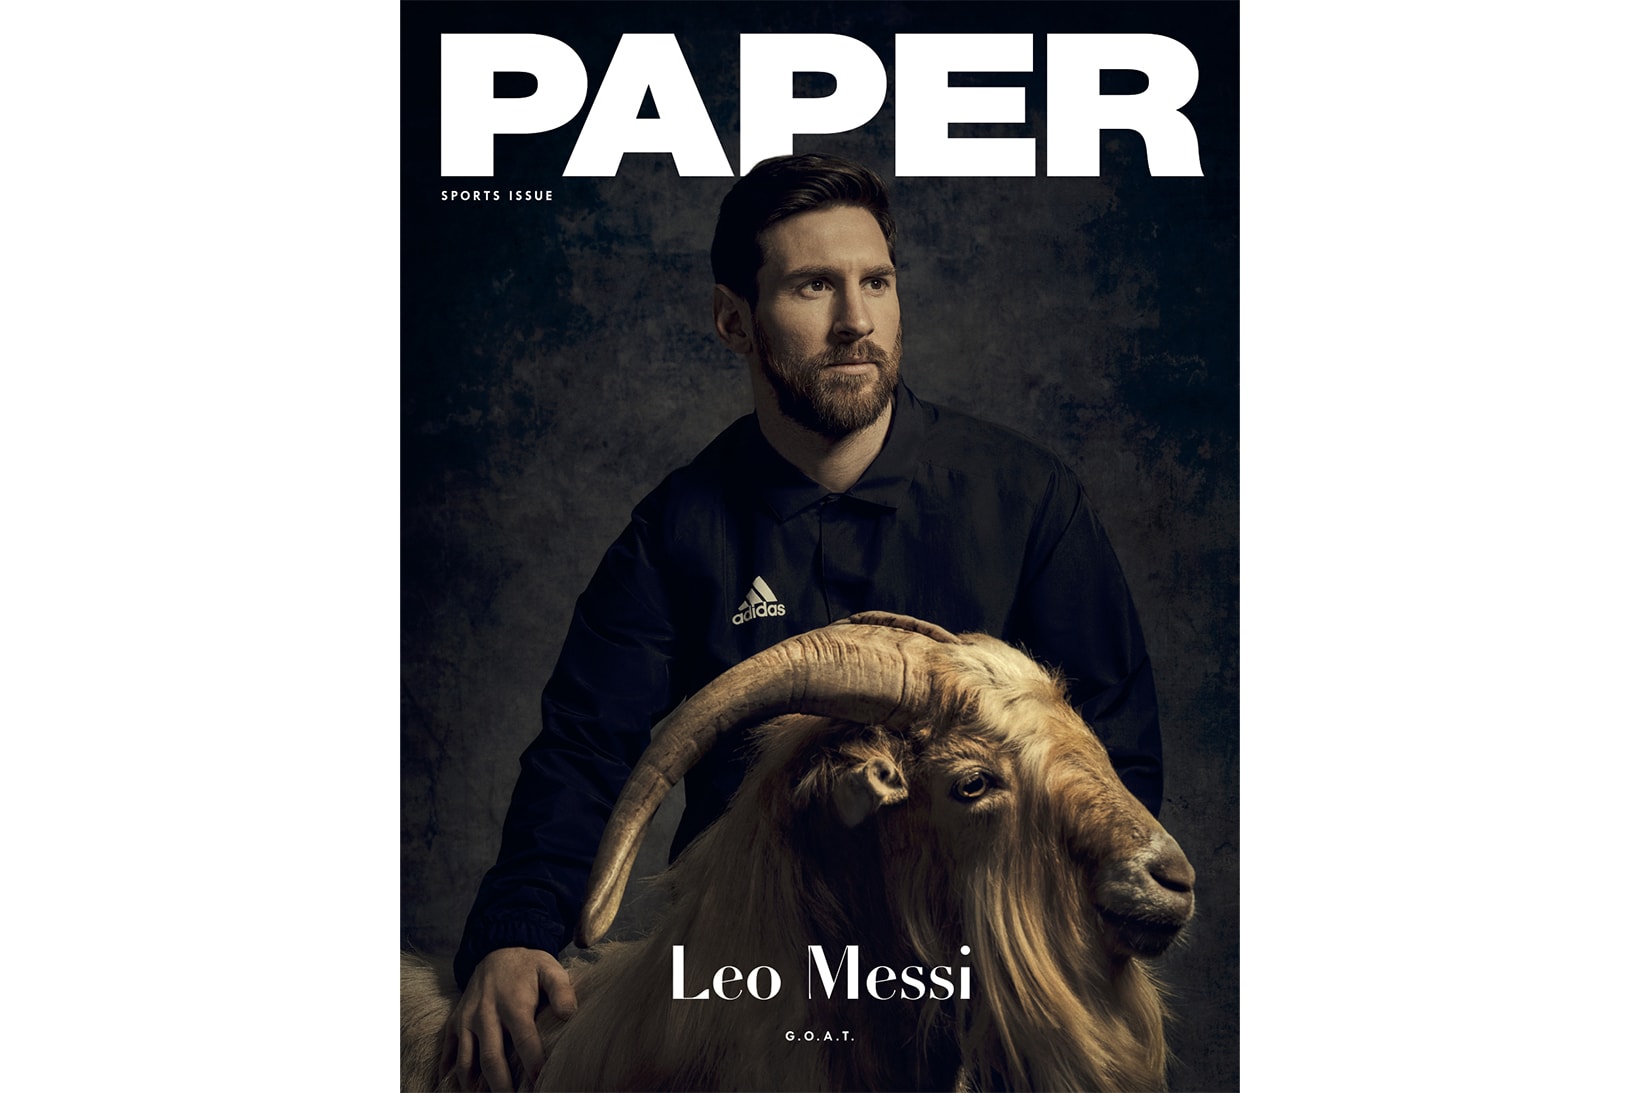 Lionel Messi PAPER Goat Cover summer 2018 world cup soccer football argentina russia sports adidas issue greatest of all time